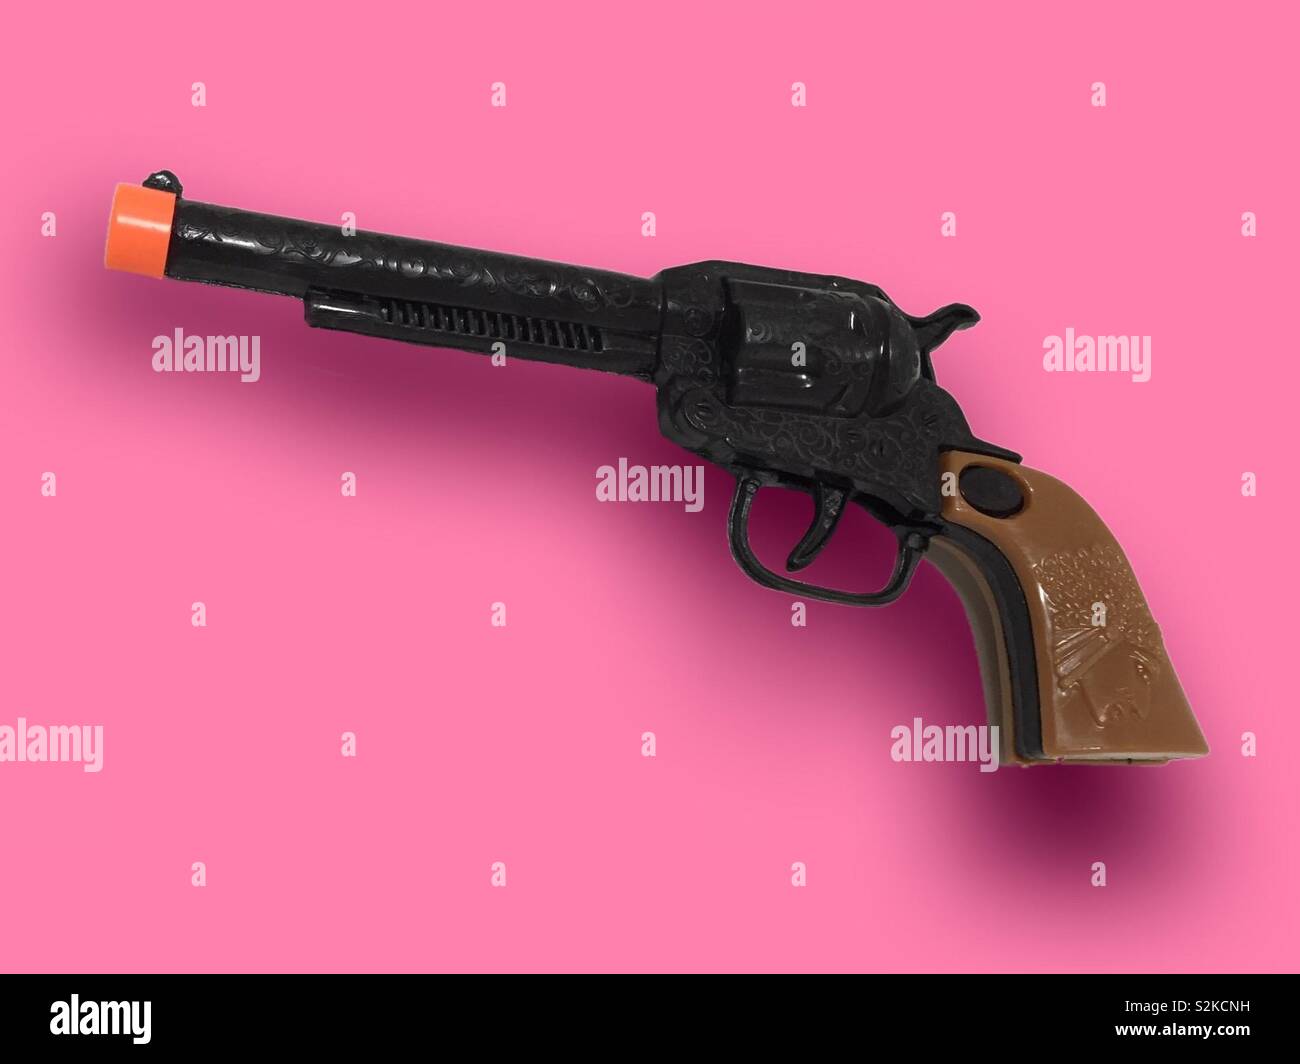 Plastic toy gun on bright pink background.  Guns and gun law.  Firearms banned and licensing in the US.  Games and protection.  A toy gun Stock Photo